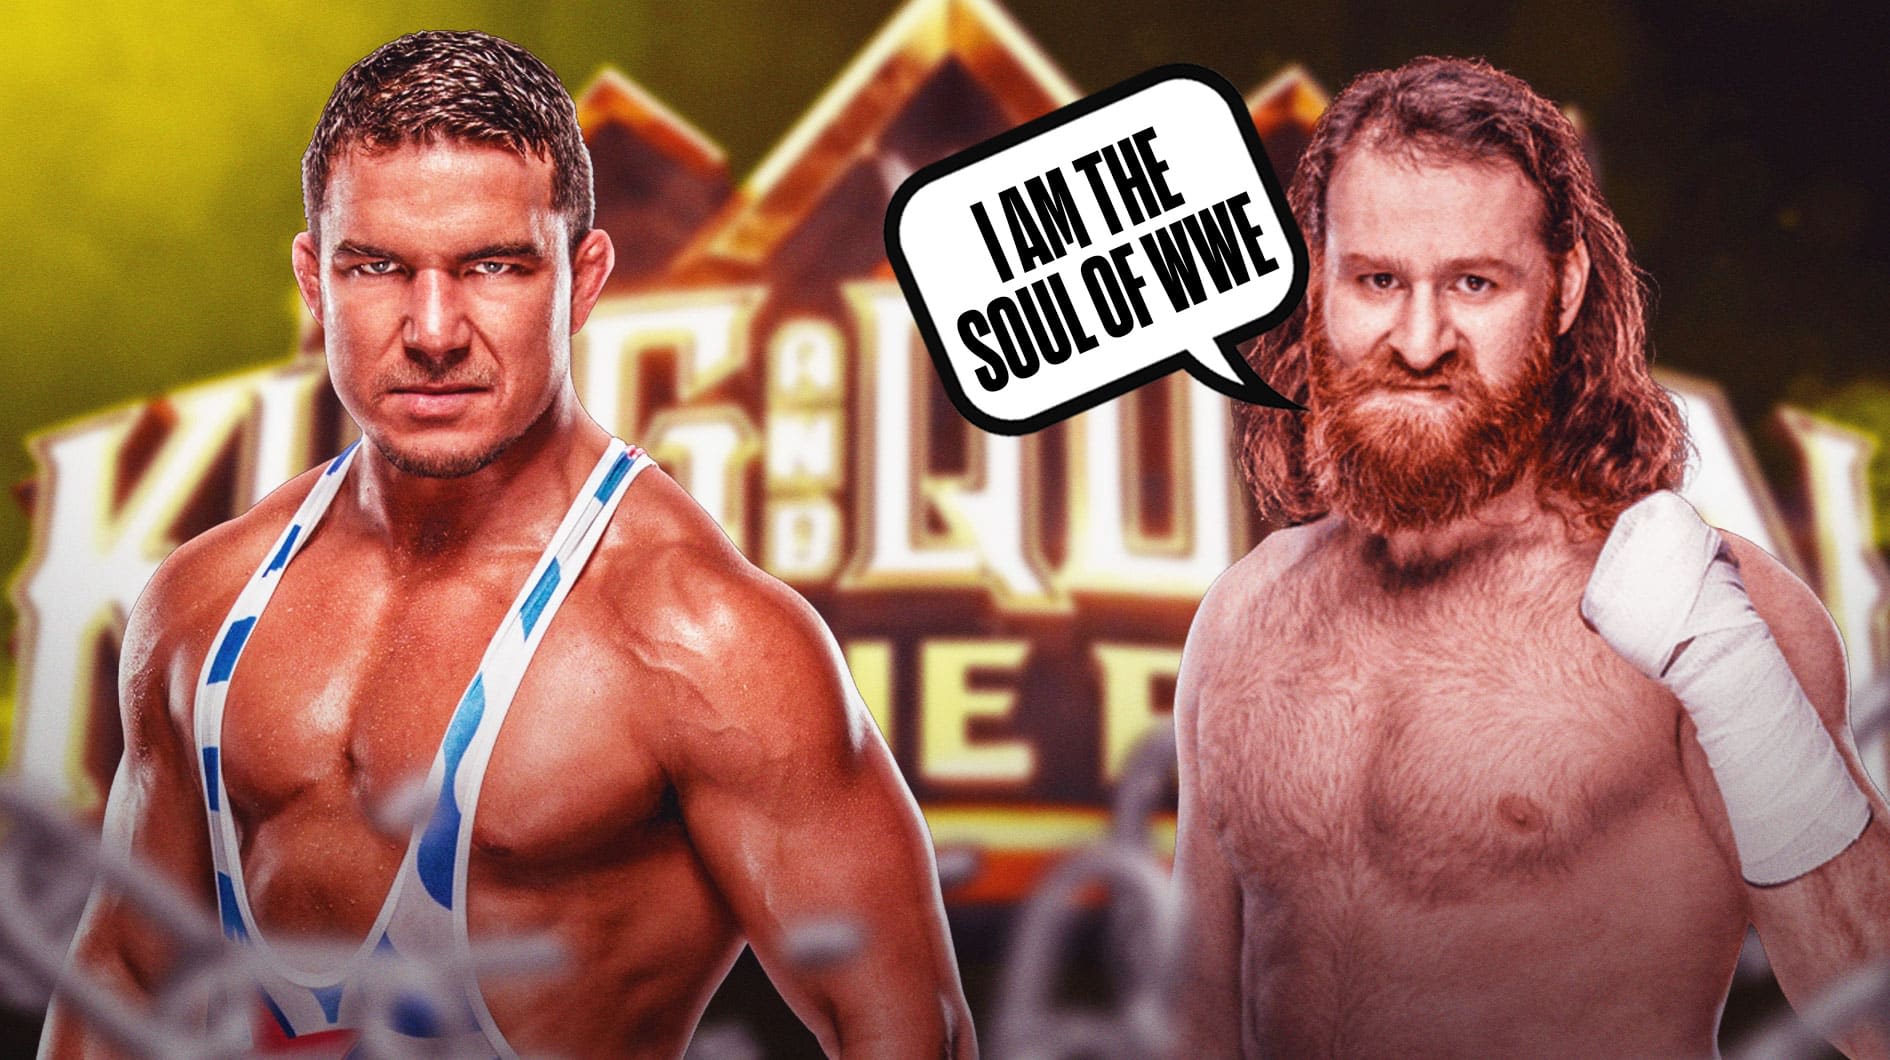 Sami Zayn declares himself the soul of WWE ahead of King of the Ring showdown with Chad Gable